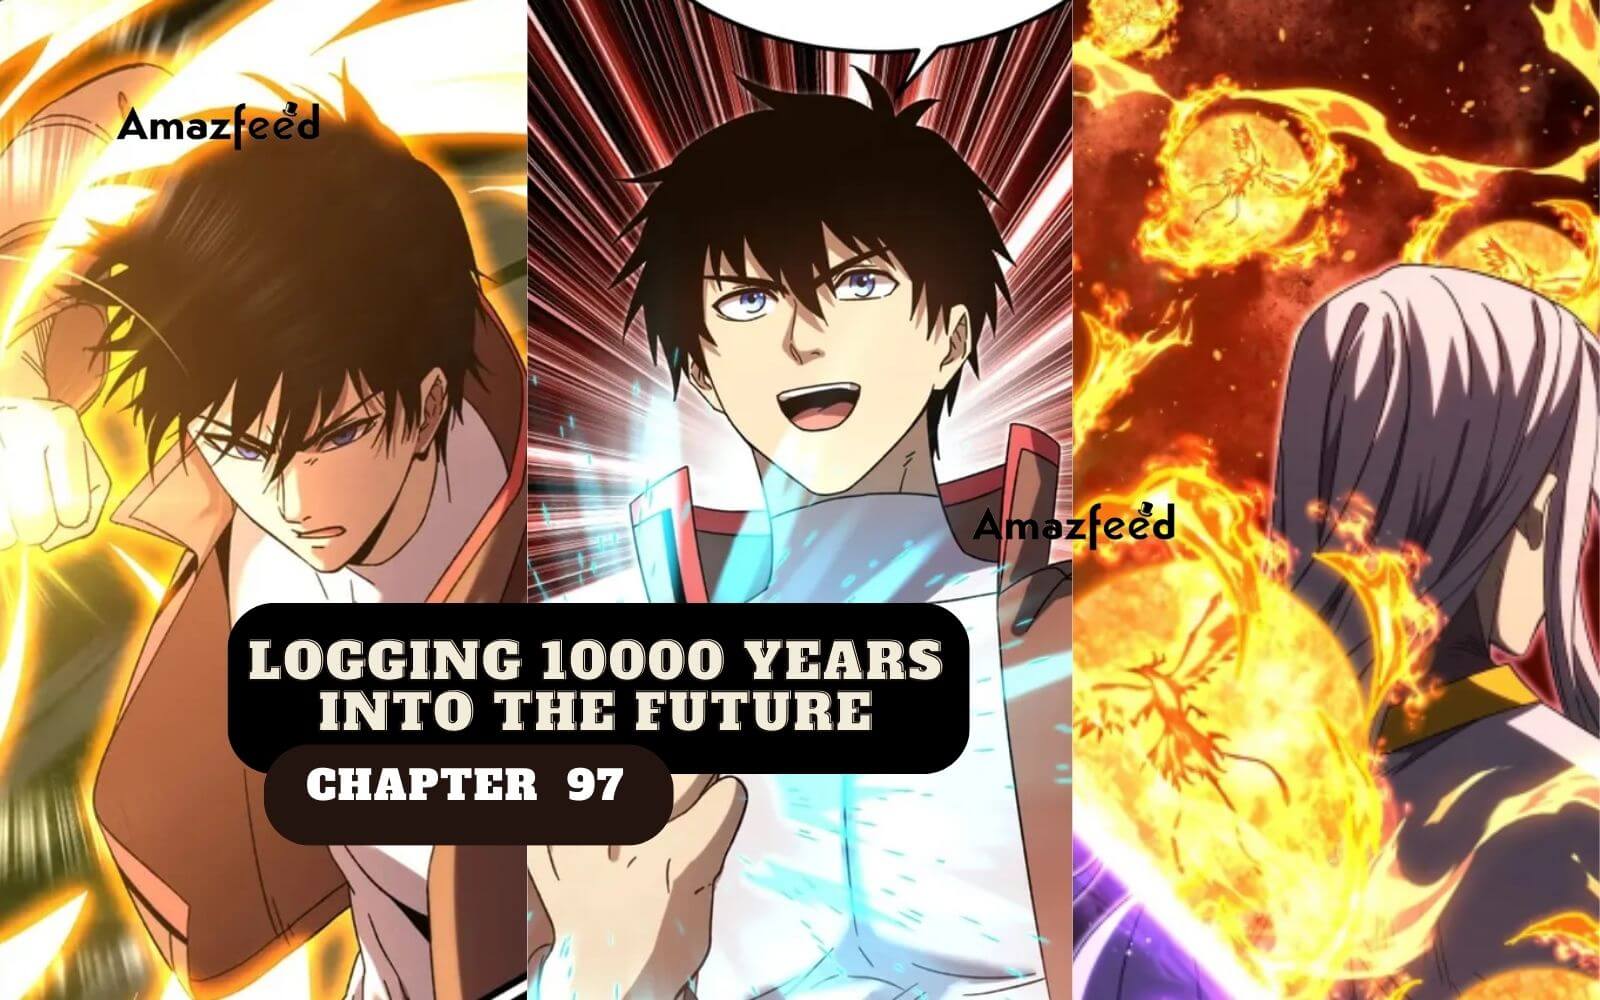 Logging 10000 Years into the Future, Chapter 97 Release Date